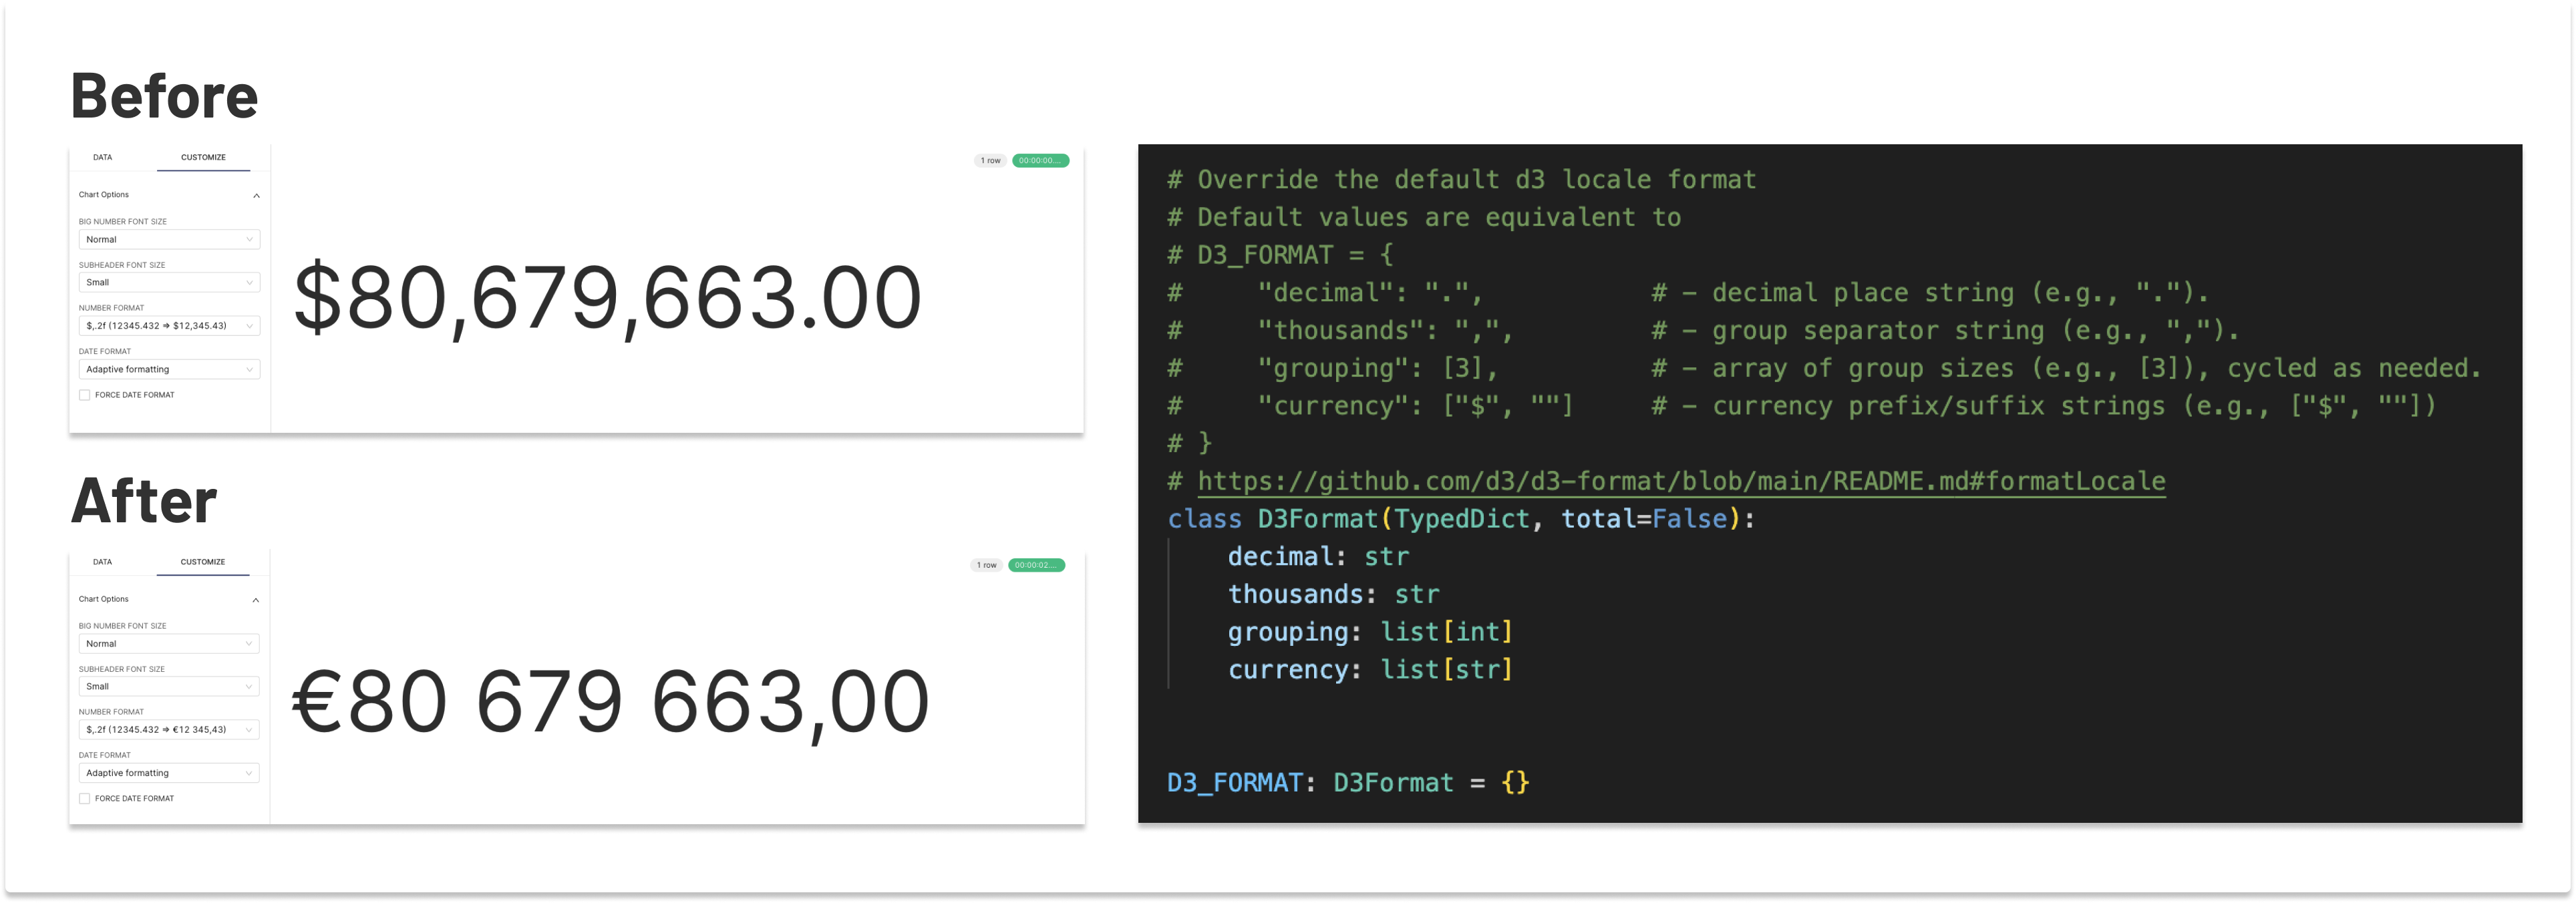 Superset Locale and Currency Config